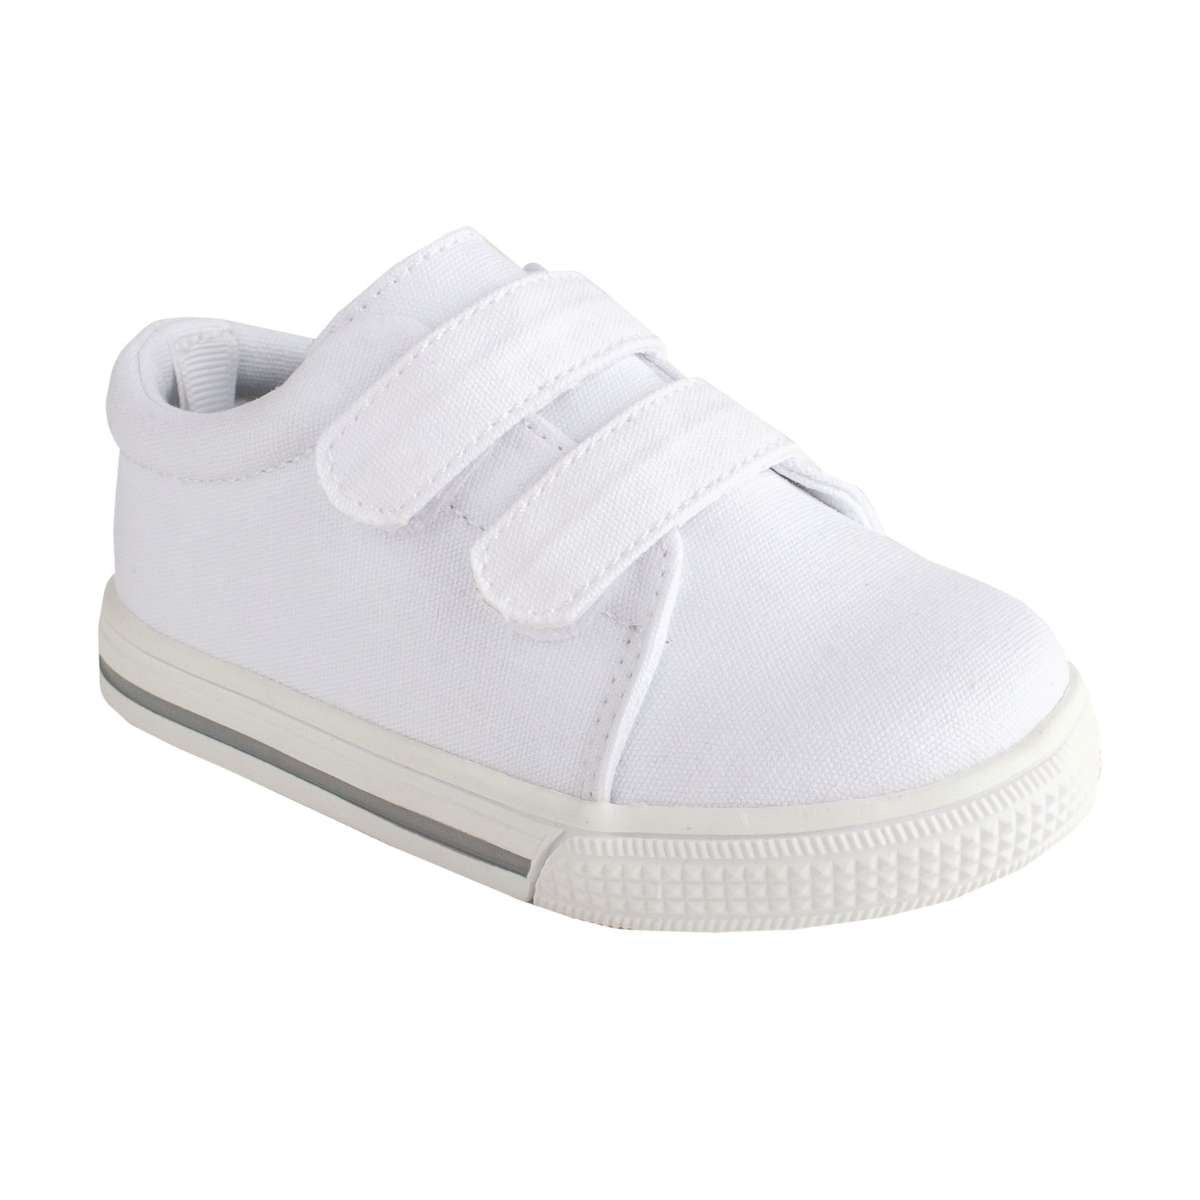 Baby Deer Baylor White Canvas Double-Strap Sneakers 6200